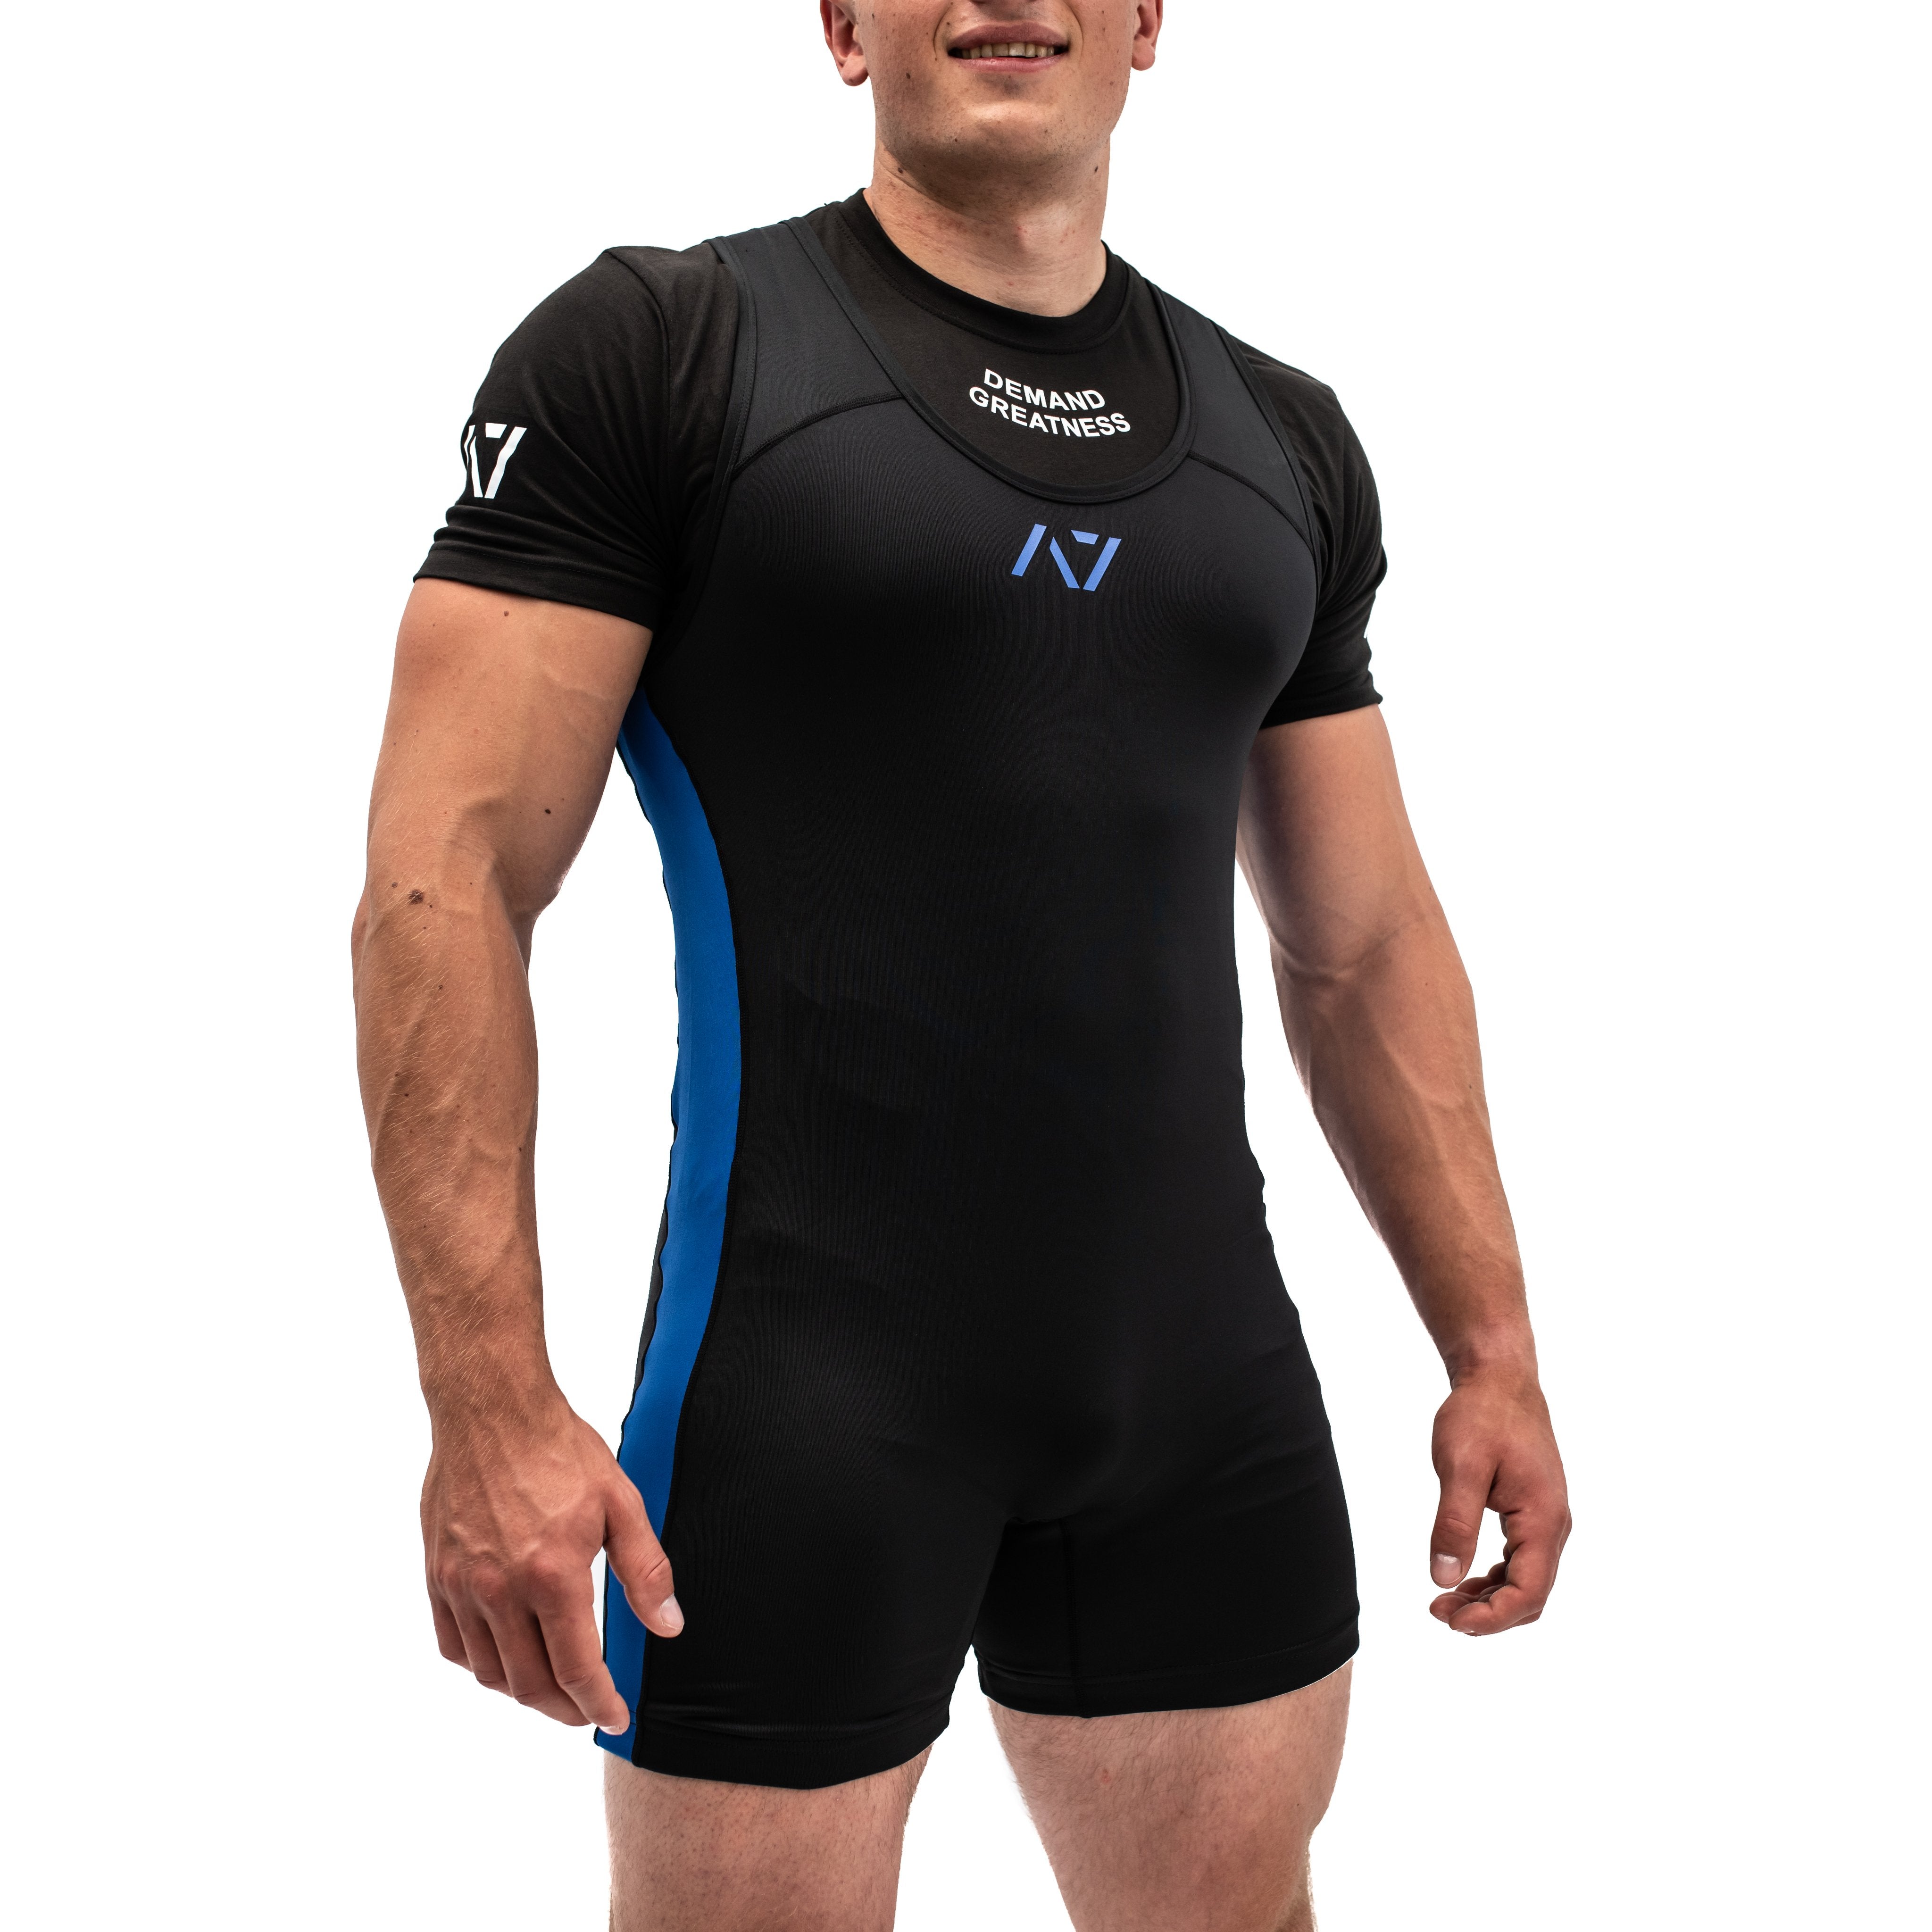 A7 IPF Approved Powerlifting Singlet is designed exclusively for powerlifting. It is very comfortable to wear and feels soft on bare skin. A7 Powerlifting Singlet is made from breathable fabric and provides compression during your lifts. The perfect piece of IPF Approved Kit! Shipping to UK and Europe including France, Italy, Poland, Sweden, Netherlands.